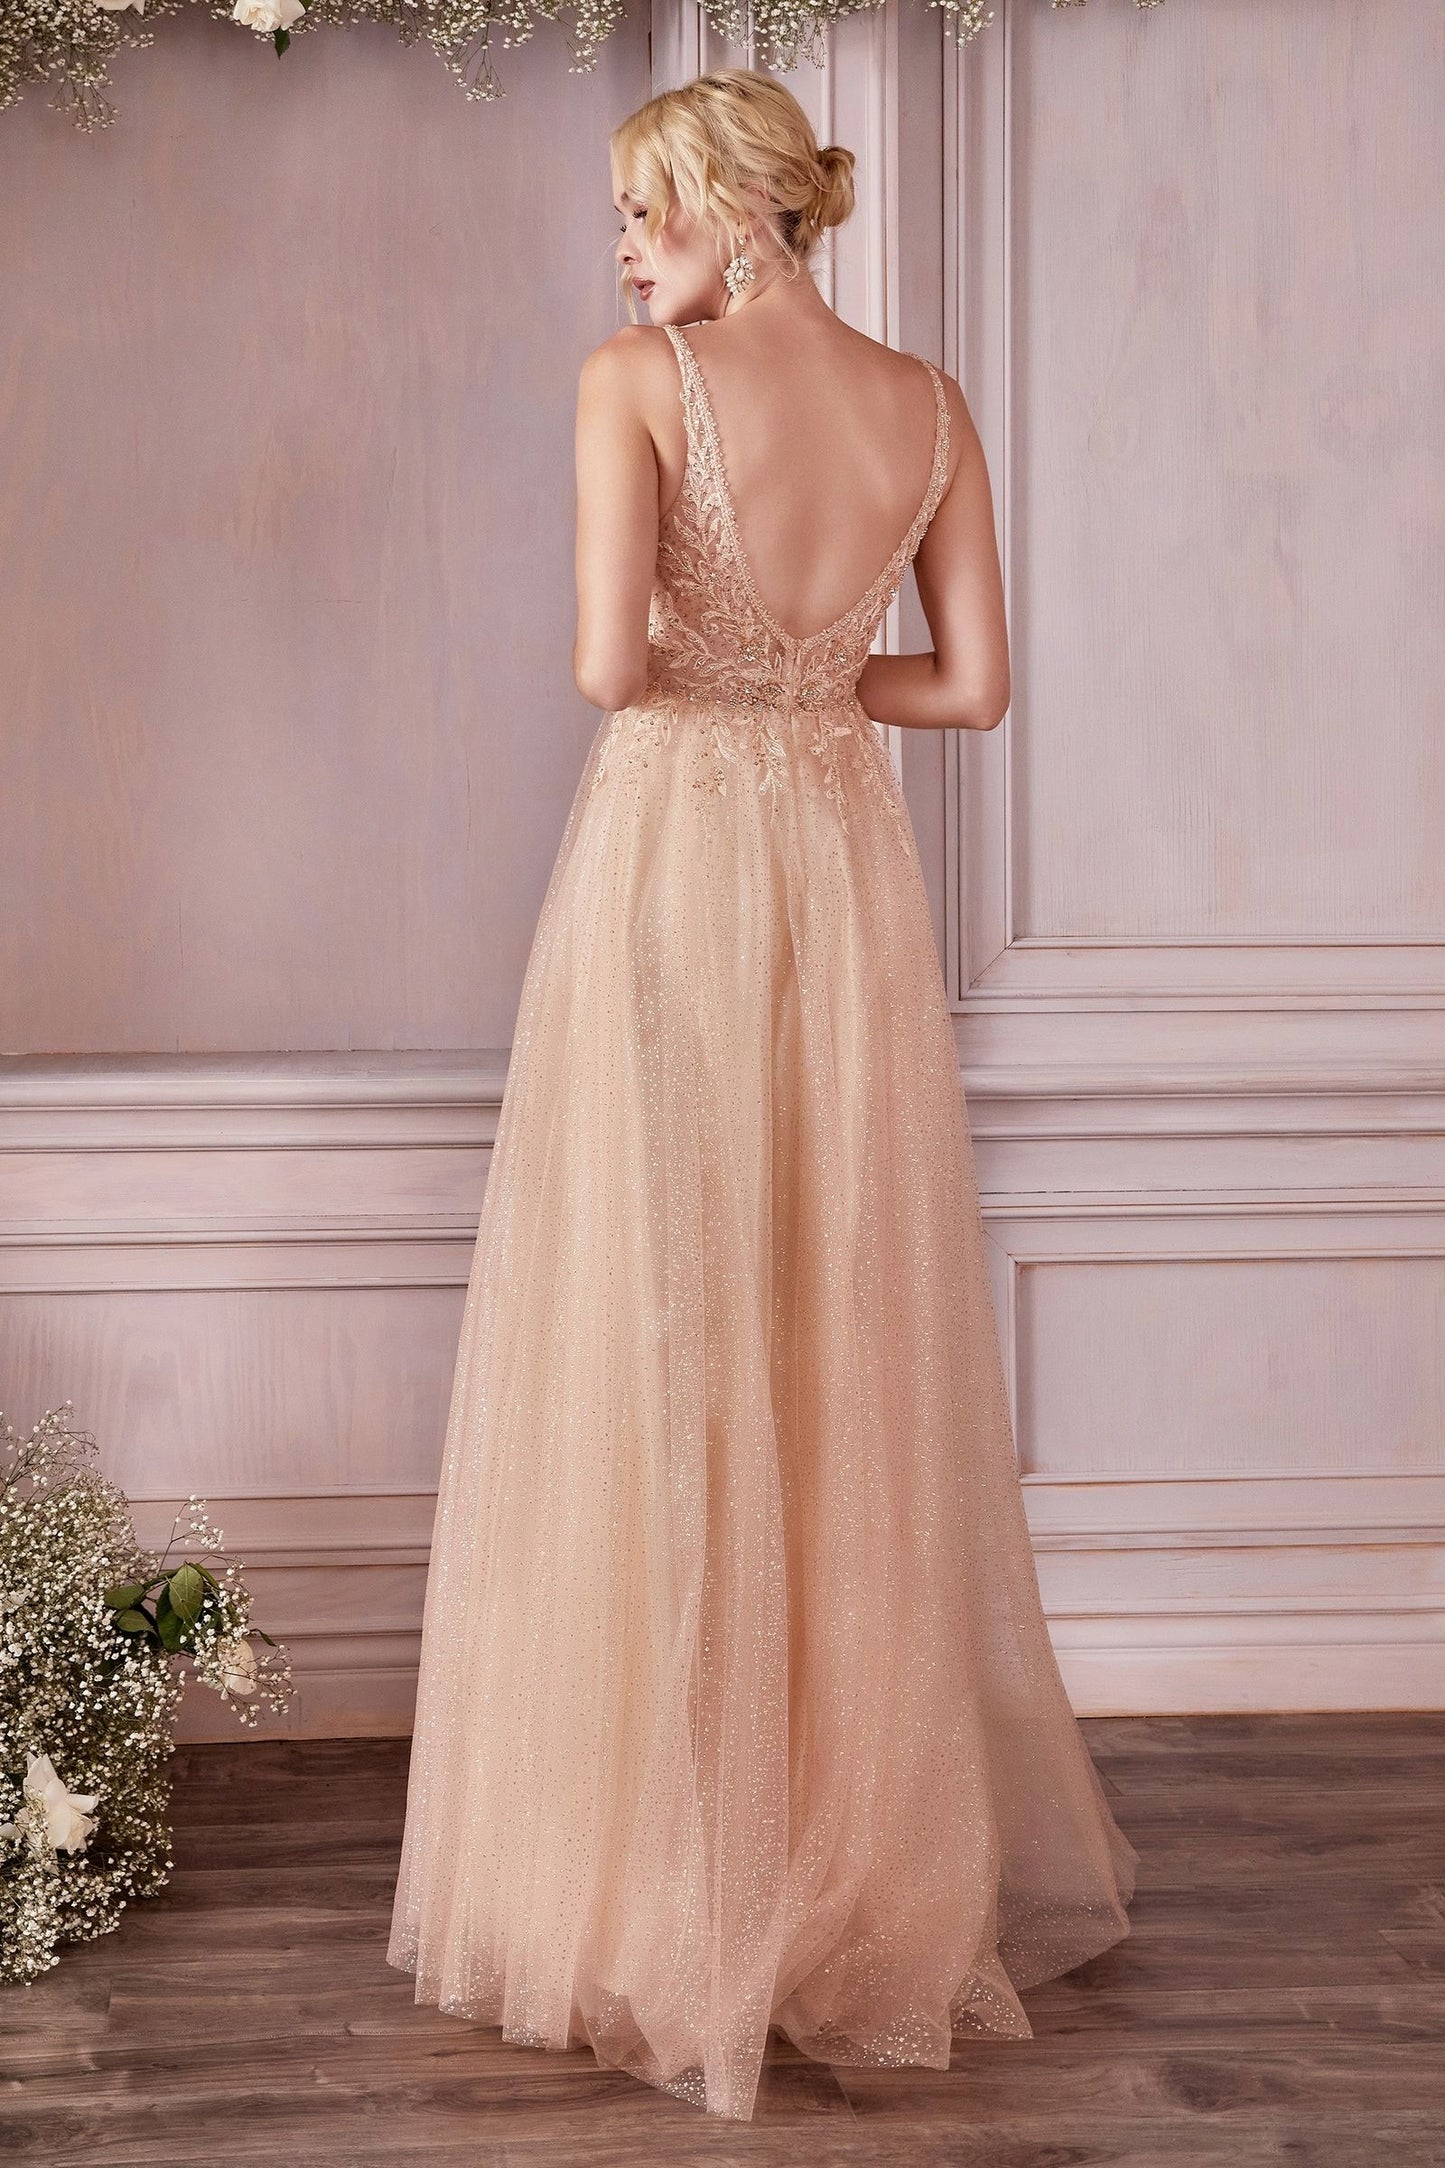 Layered Tulle A-Line Dress in Pastel Pink . Ethereal and Romantic